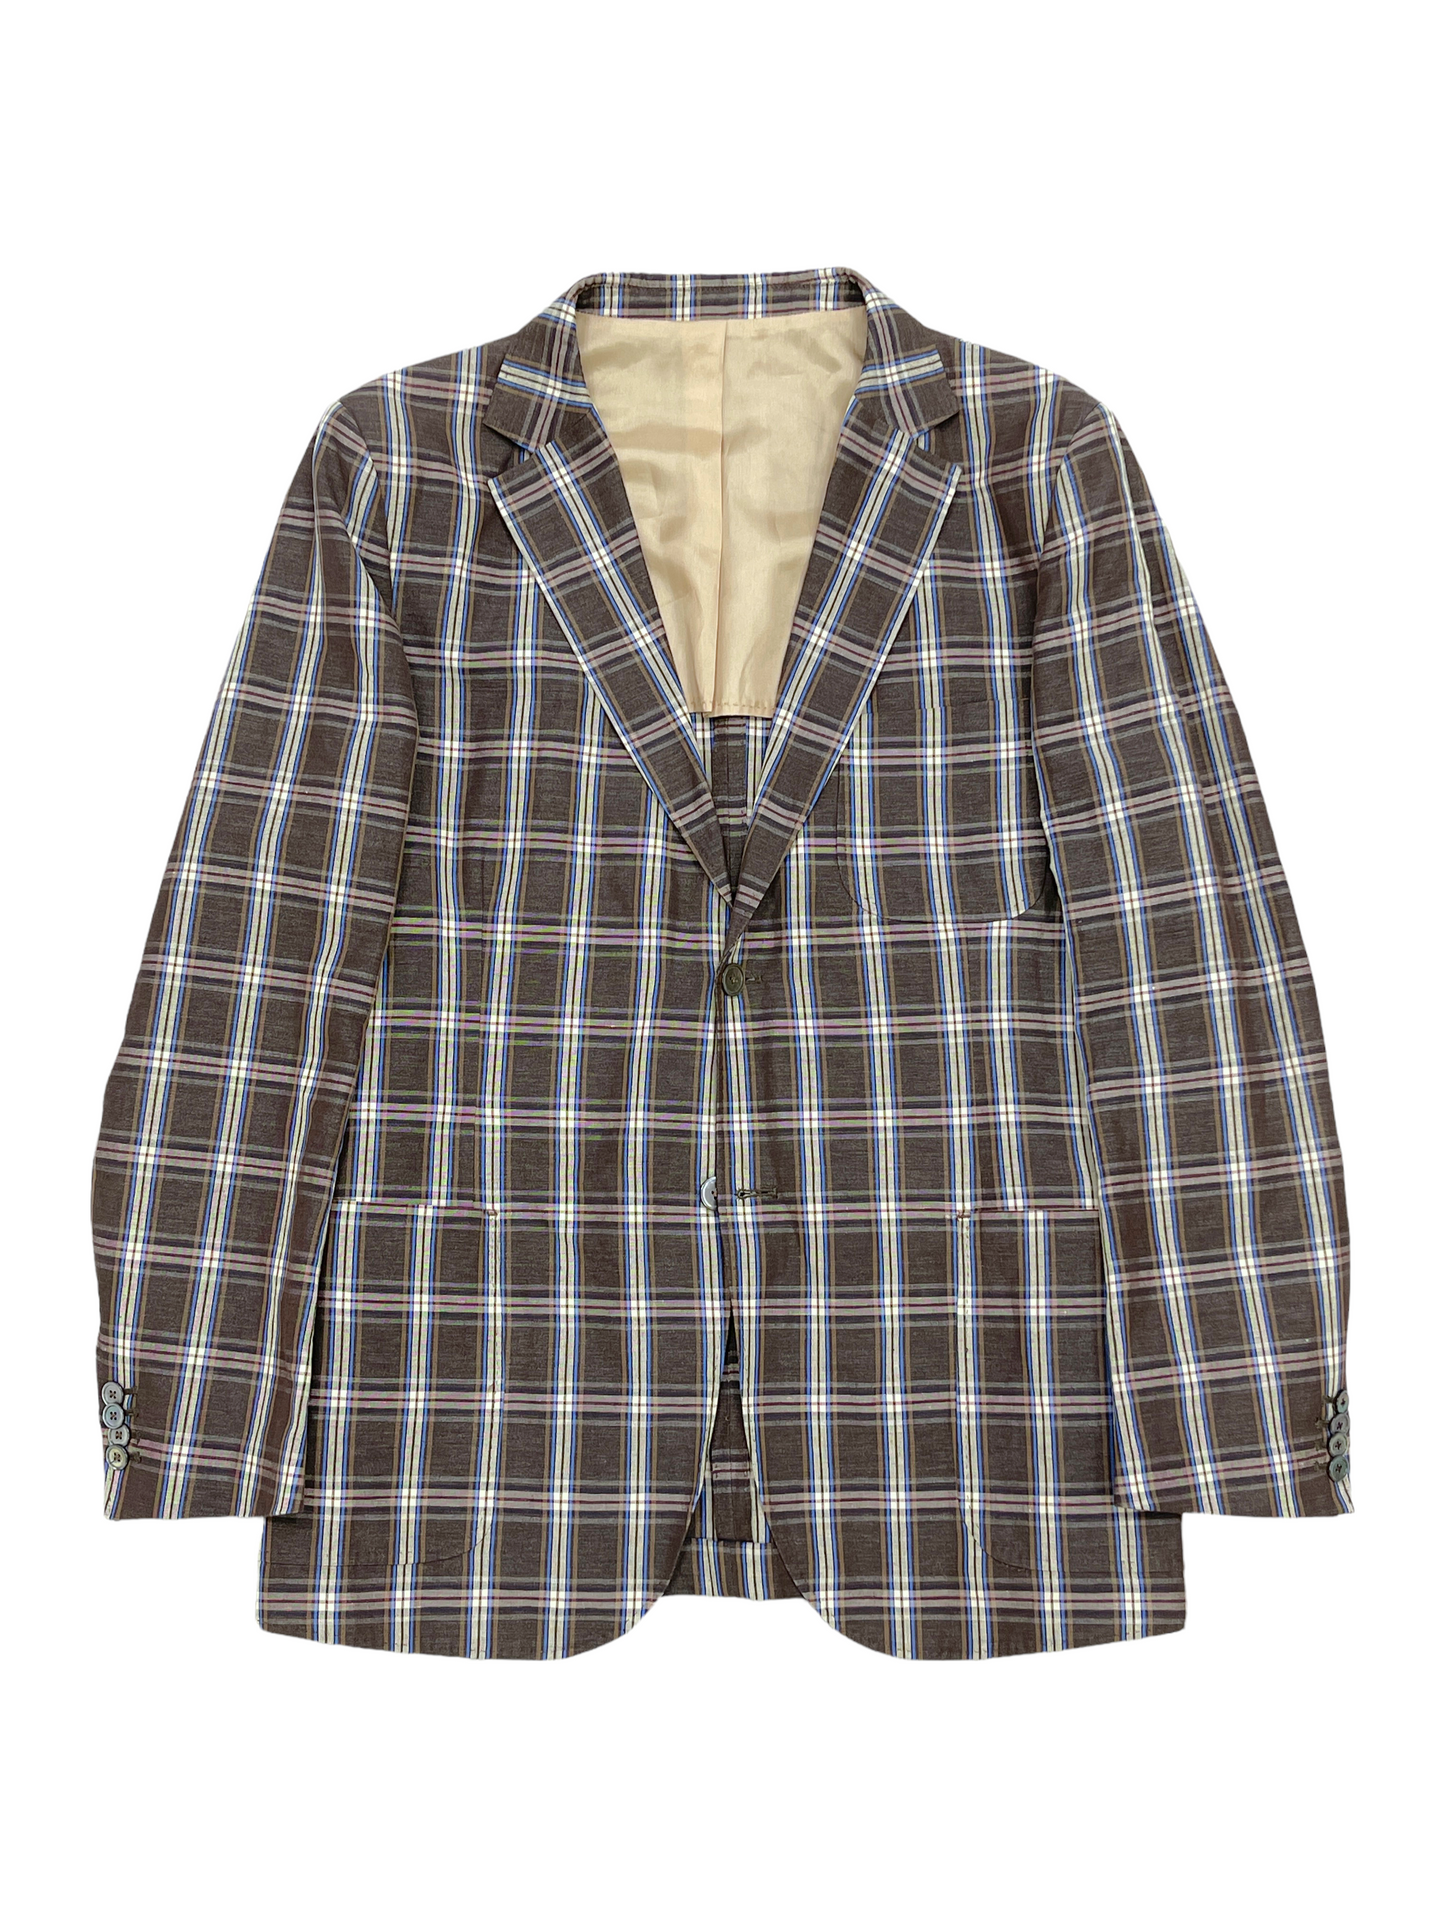 J. Lindeberg Brown Blue Windowpane Plaid Unlined Sport Jacket 44R - Genuine Design Luxury Consignment for Men. New & Pre-Owned Clothing, Shoes, & Accessories. Calgary, Canada